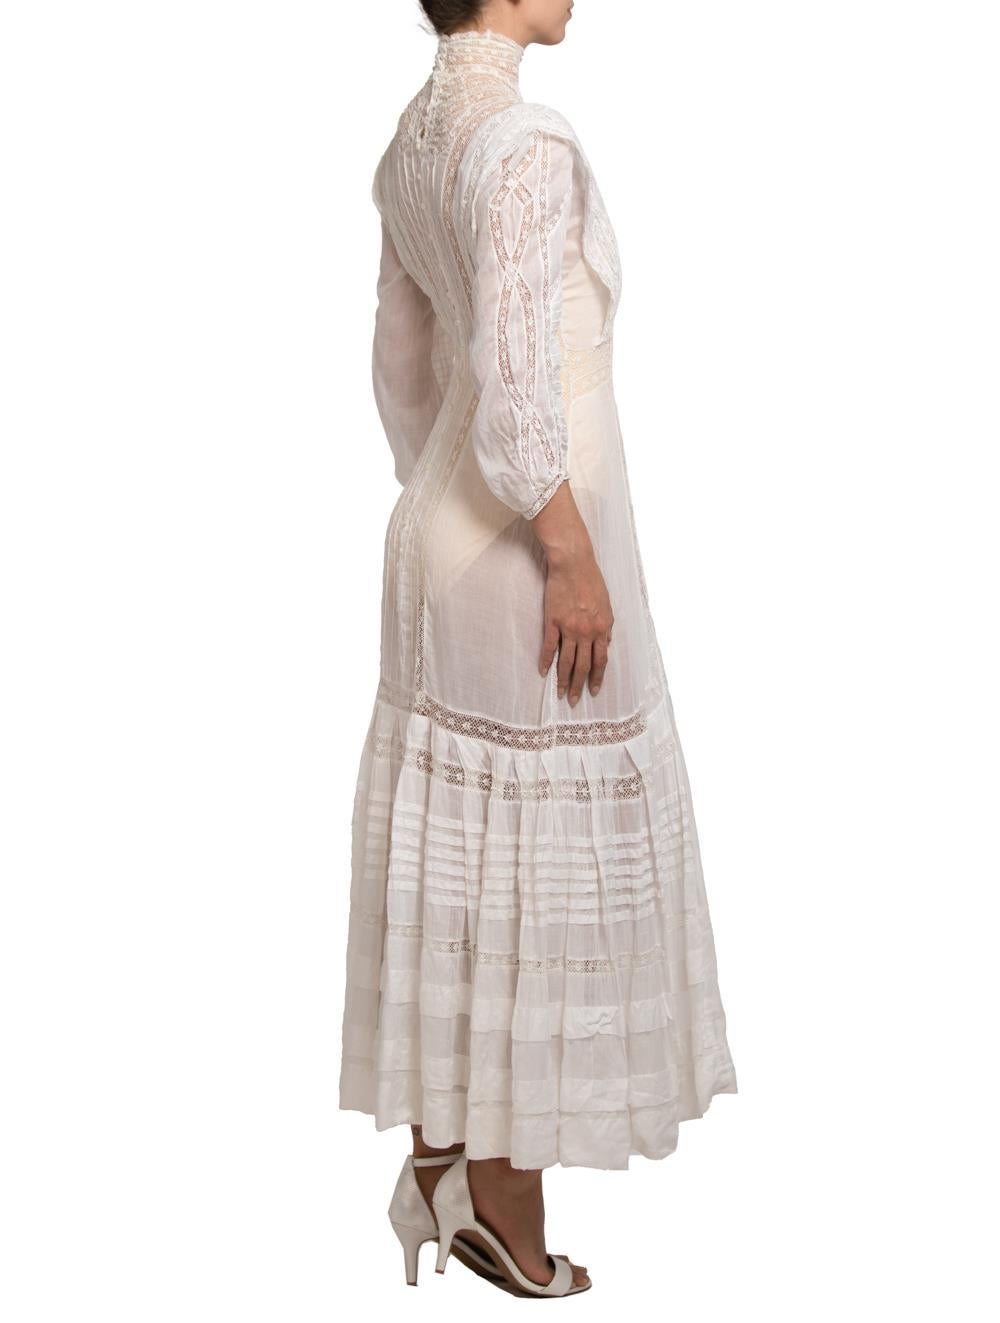 Victorian Cream Organic Cotton Voile & Lace Long Sleeved Dress For Sale 3